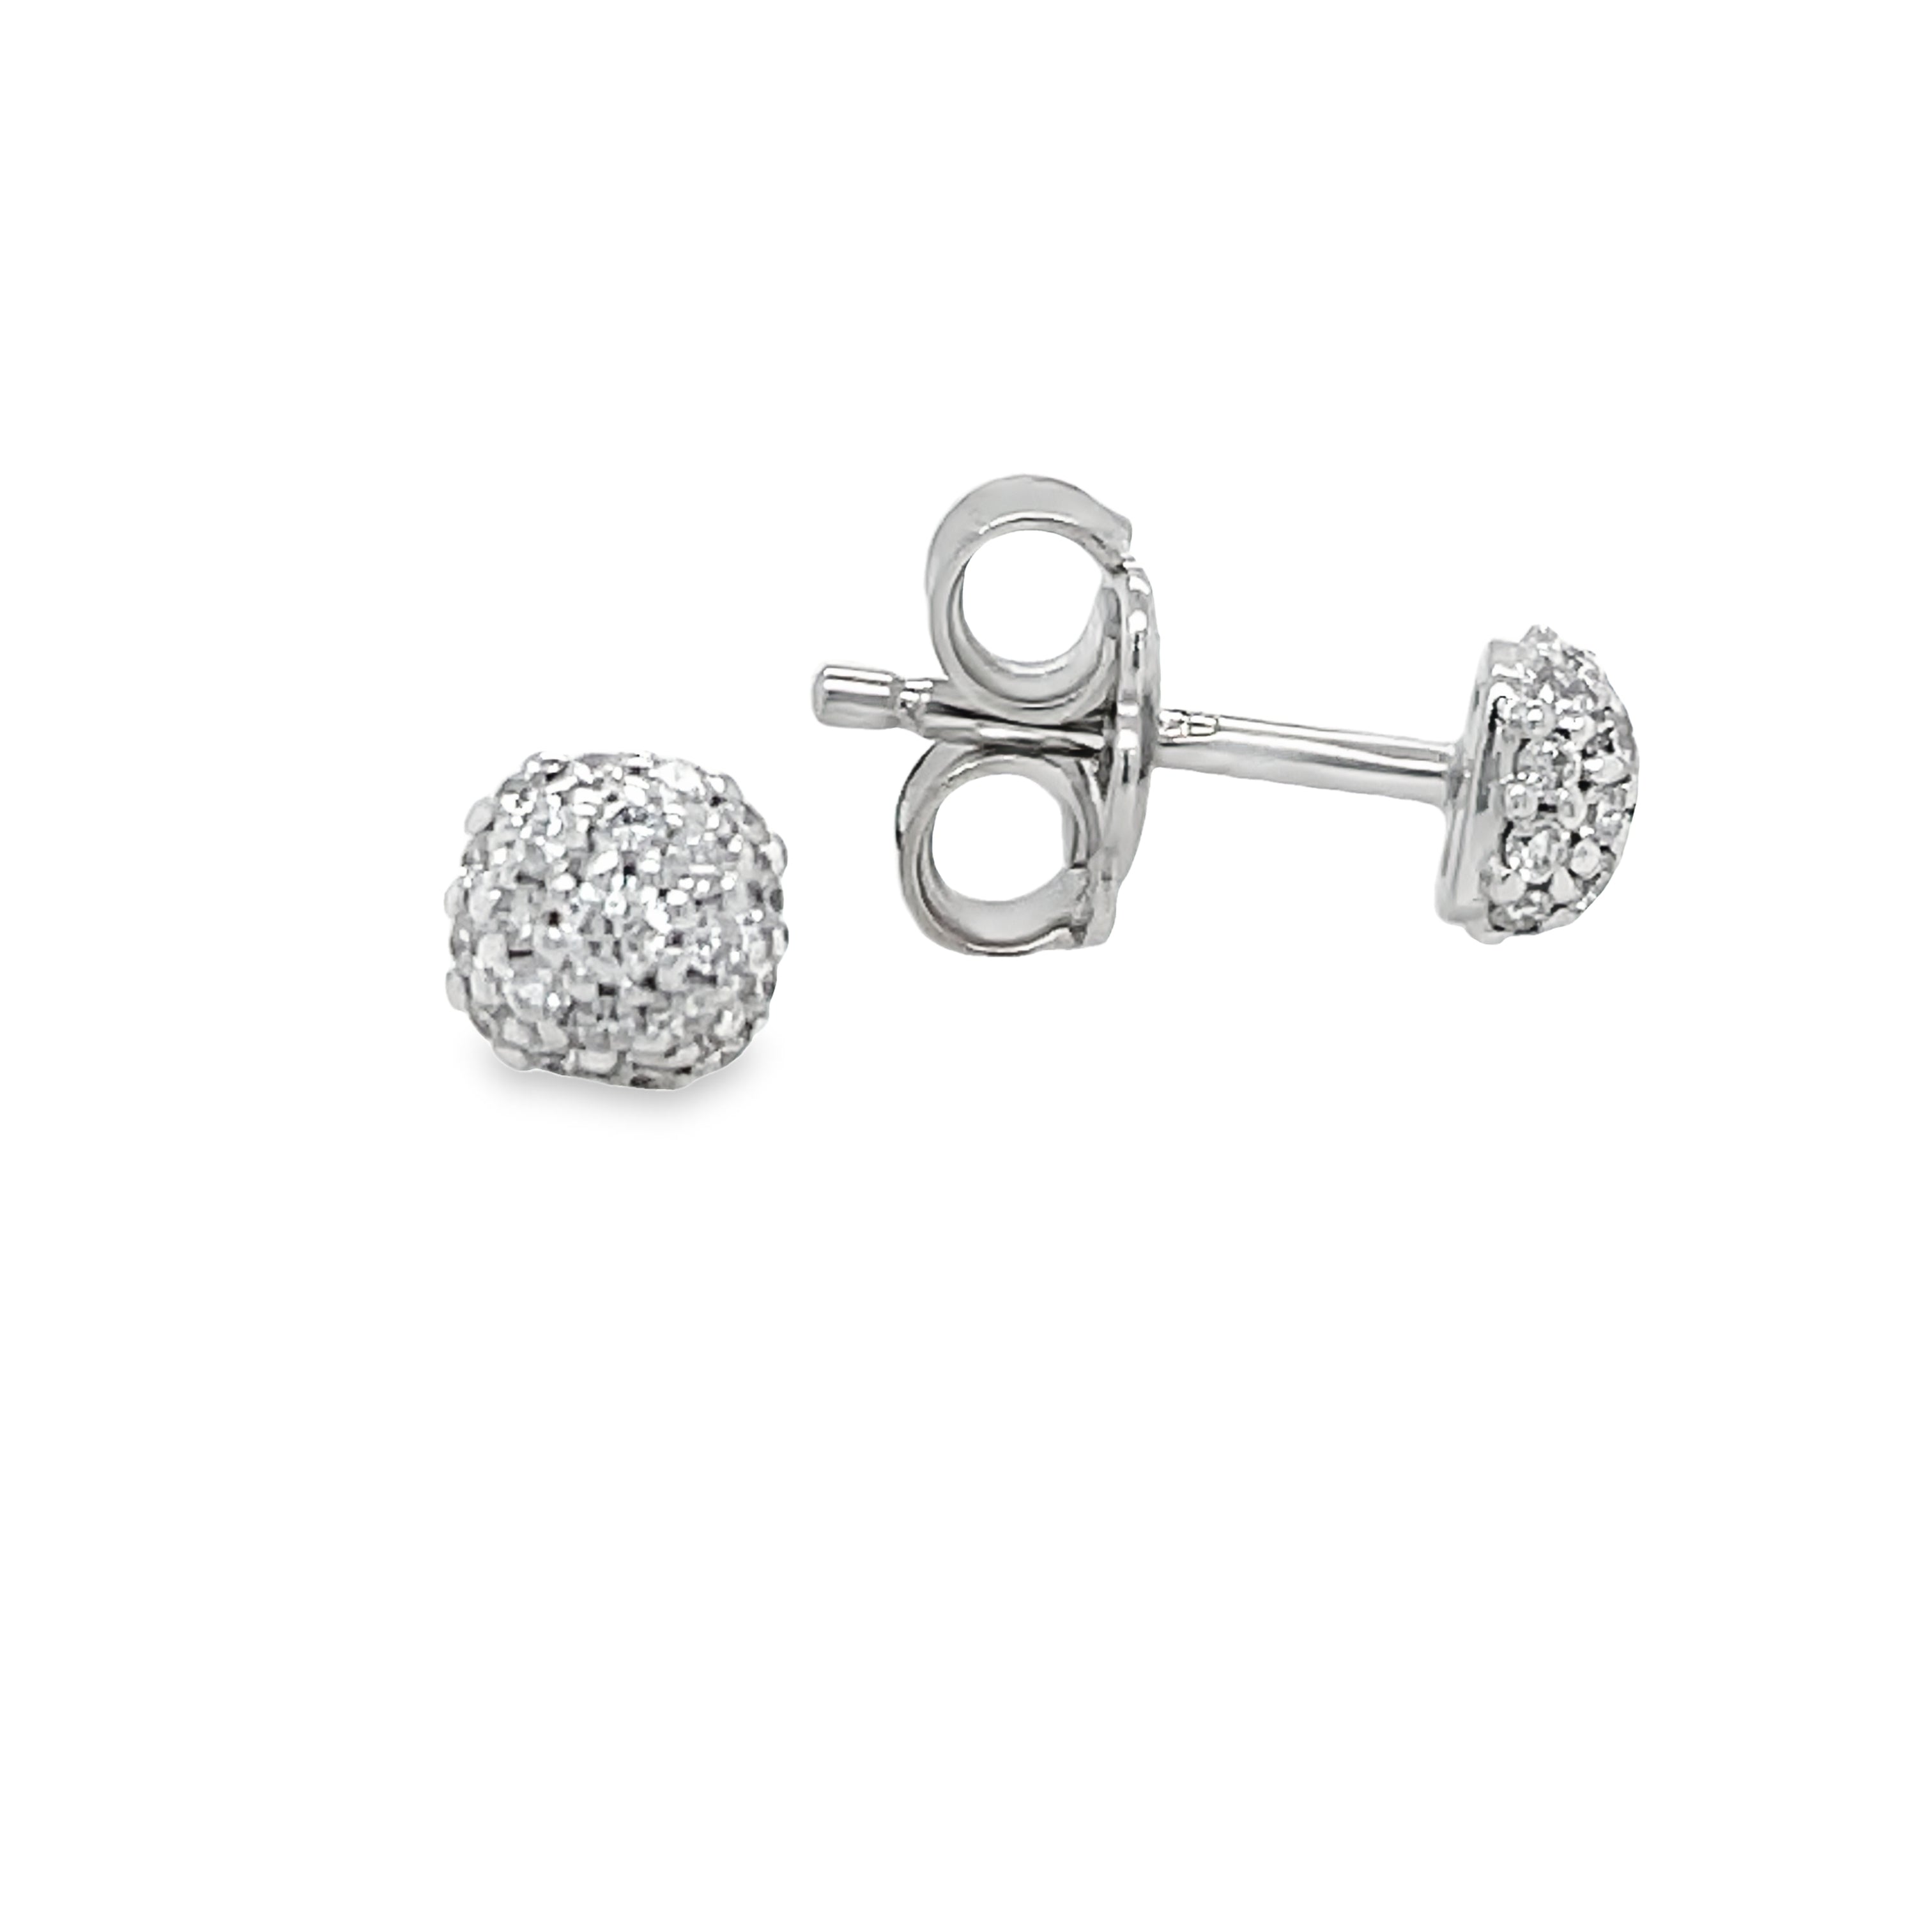 Experience luxury and elegance with our 18k white gold diamond stud earrings. Handcrafted in Italy, the round shape and diamond pave (0.23 cts) add a touch of glamour to any outfit. The friction back ensures a secure fit for all-day wear. Elevate your style with these 5.20mm earrings!   